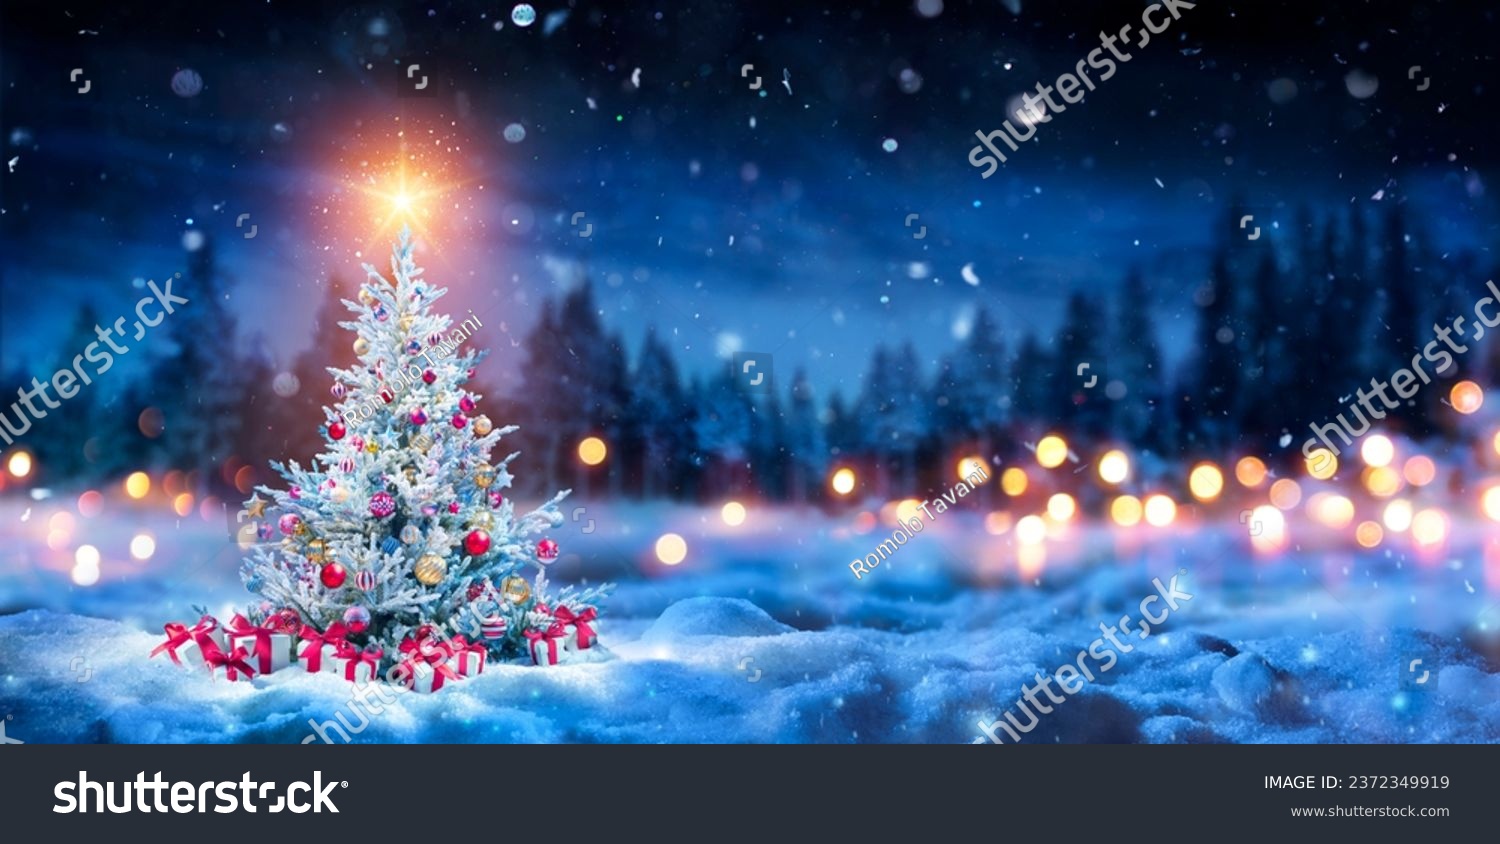 Christmas Tree And Gift Boxes On Snow In Night With Shiny Star and Forest - Winter Abstract Landscape #2372349919